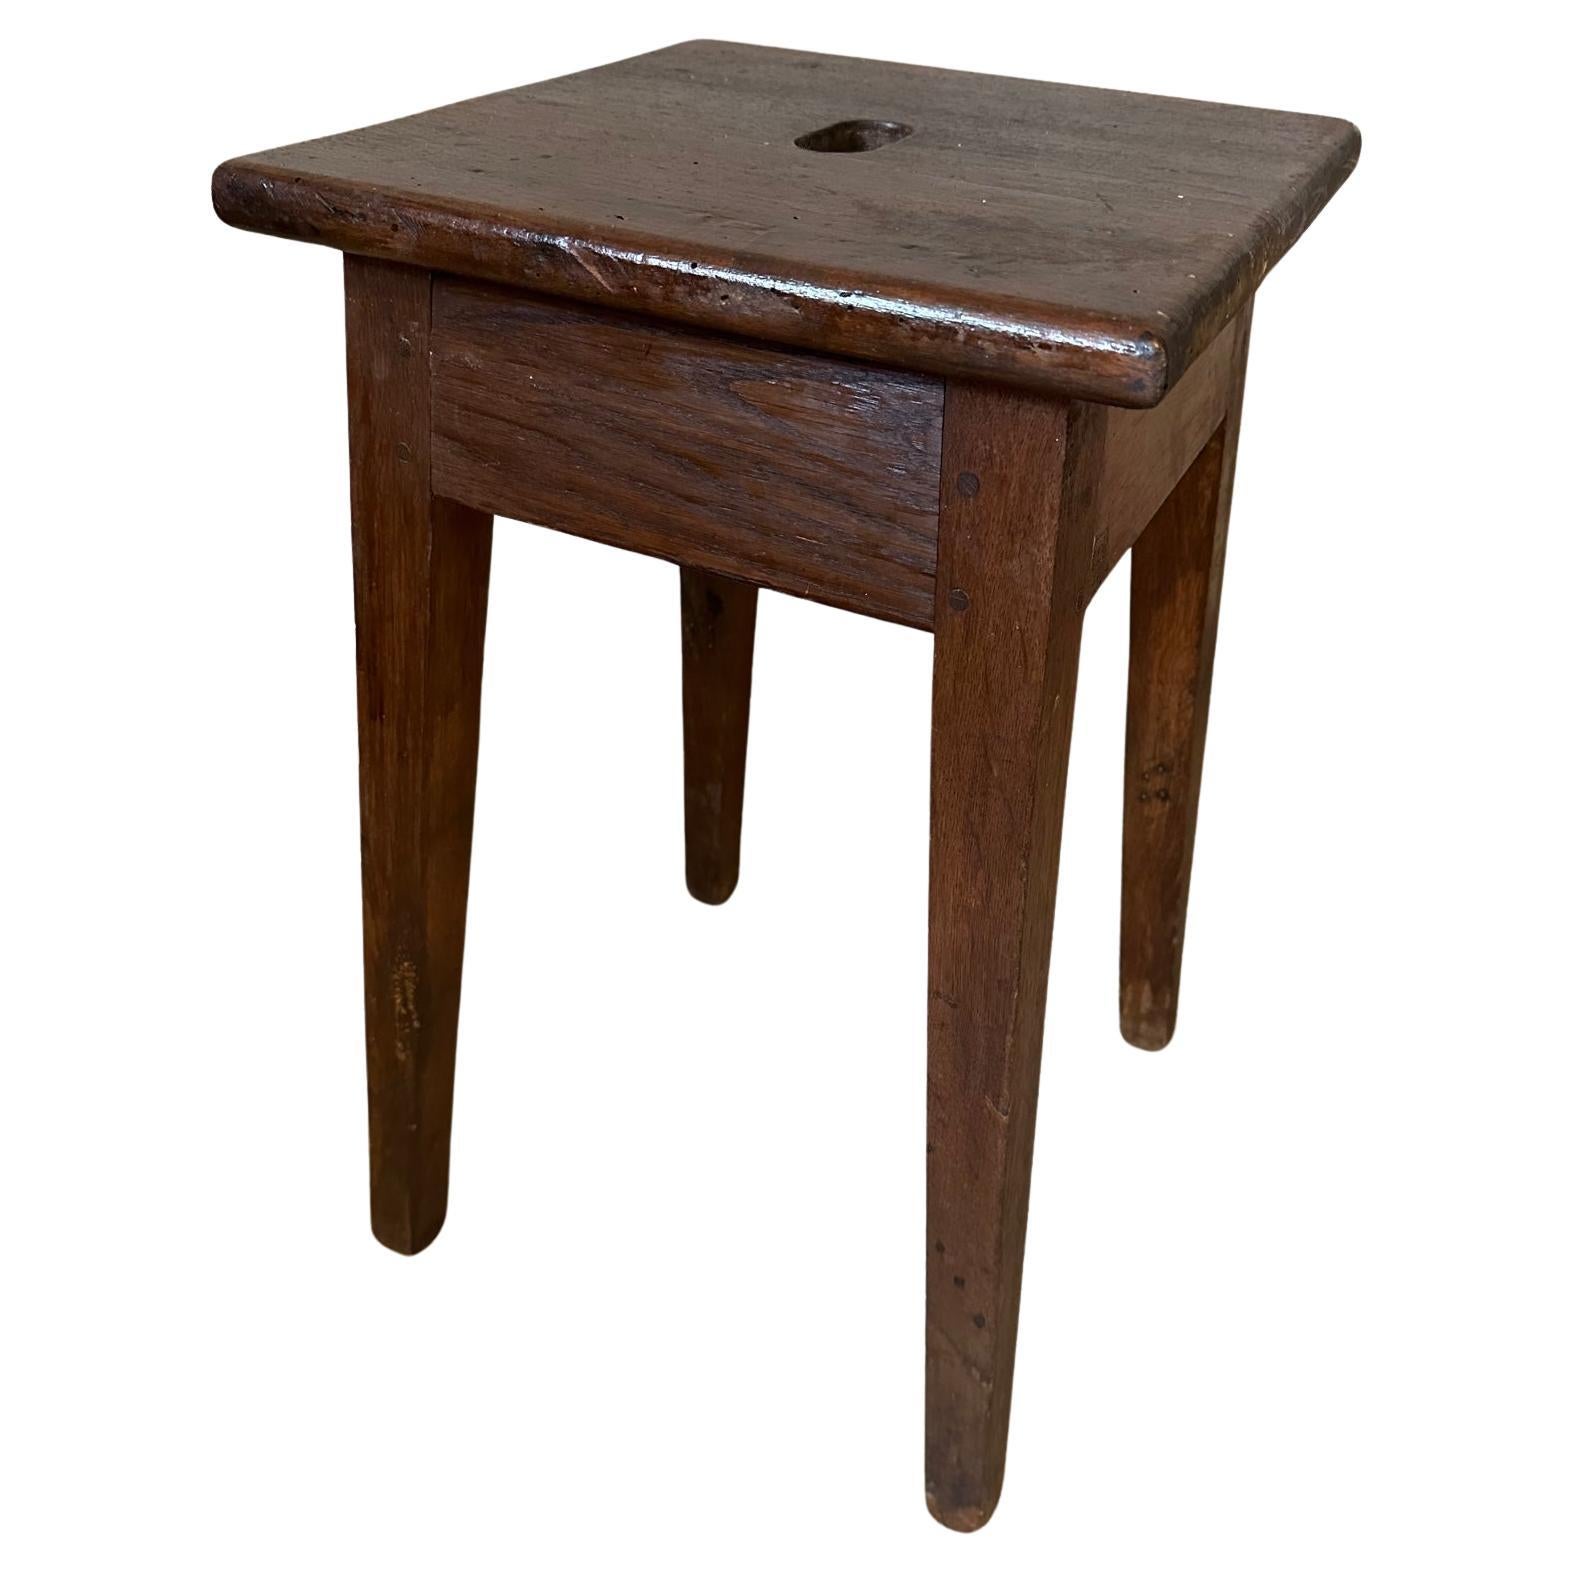 Early 20th century French Oak Workshop Stool, 1900s